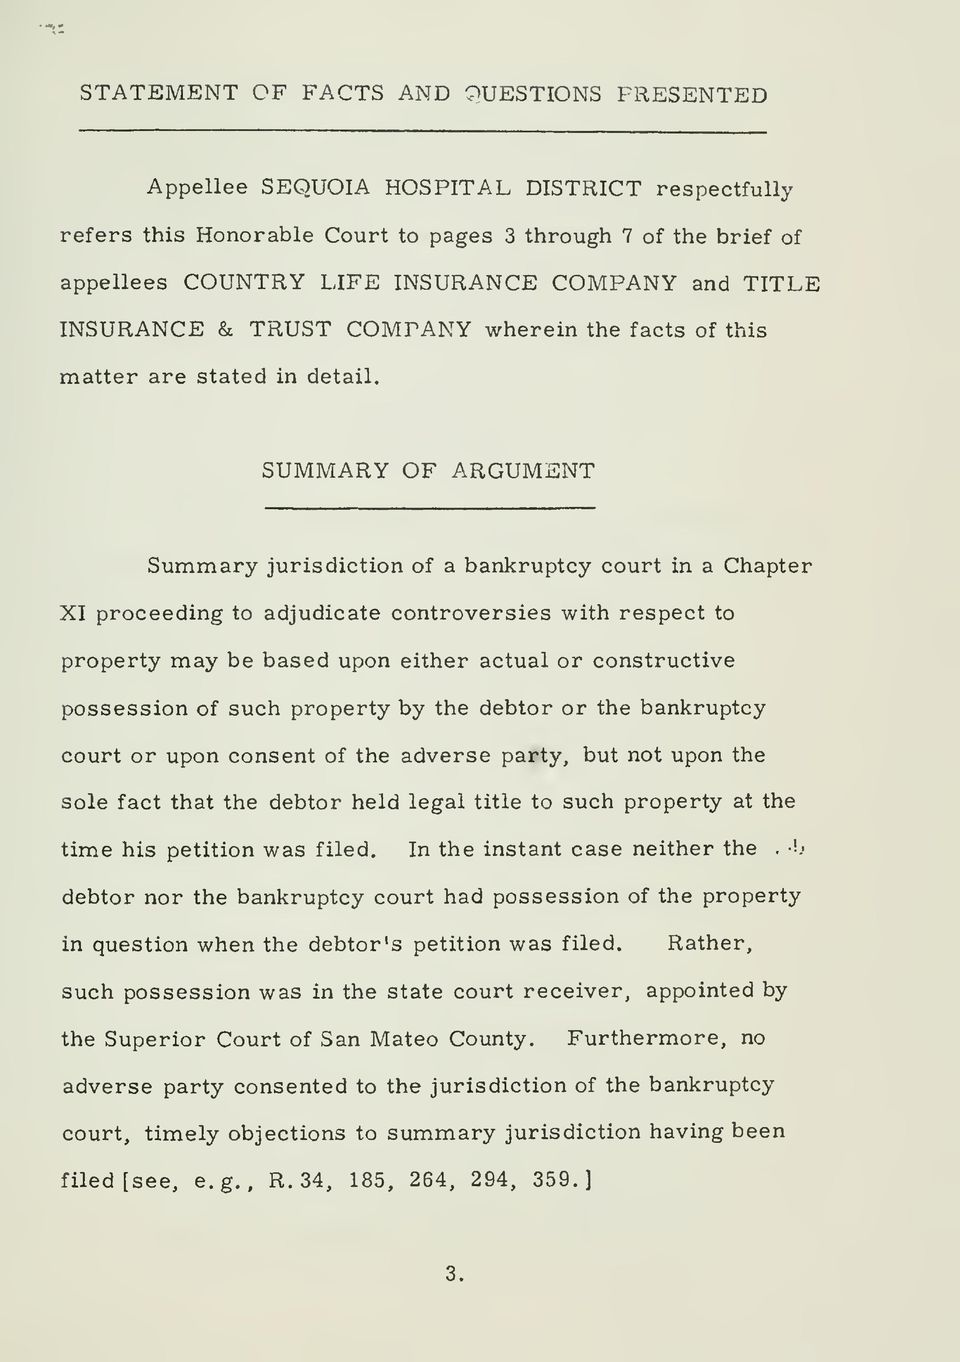 SUMMARY OF ARGUMENT Summary jurisdiction of a bankruptcy court in a Chapter XI proceeding to adjudicate controversies with respect to property may be based upon either actual or constructive